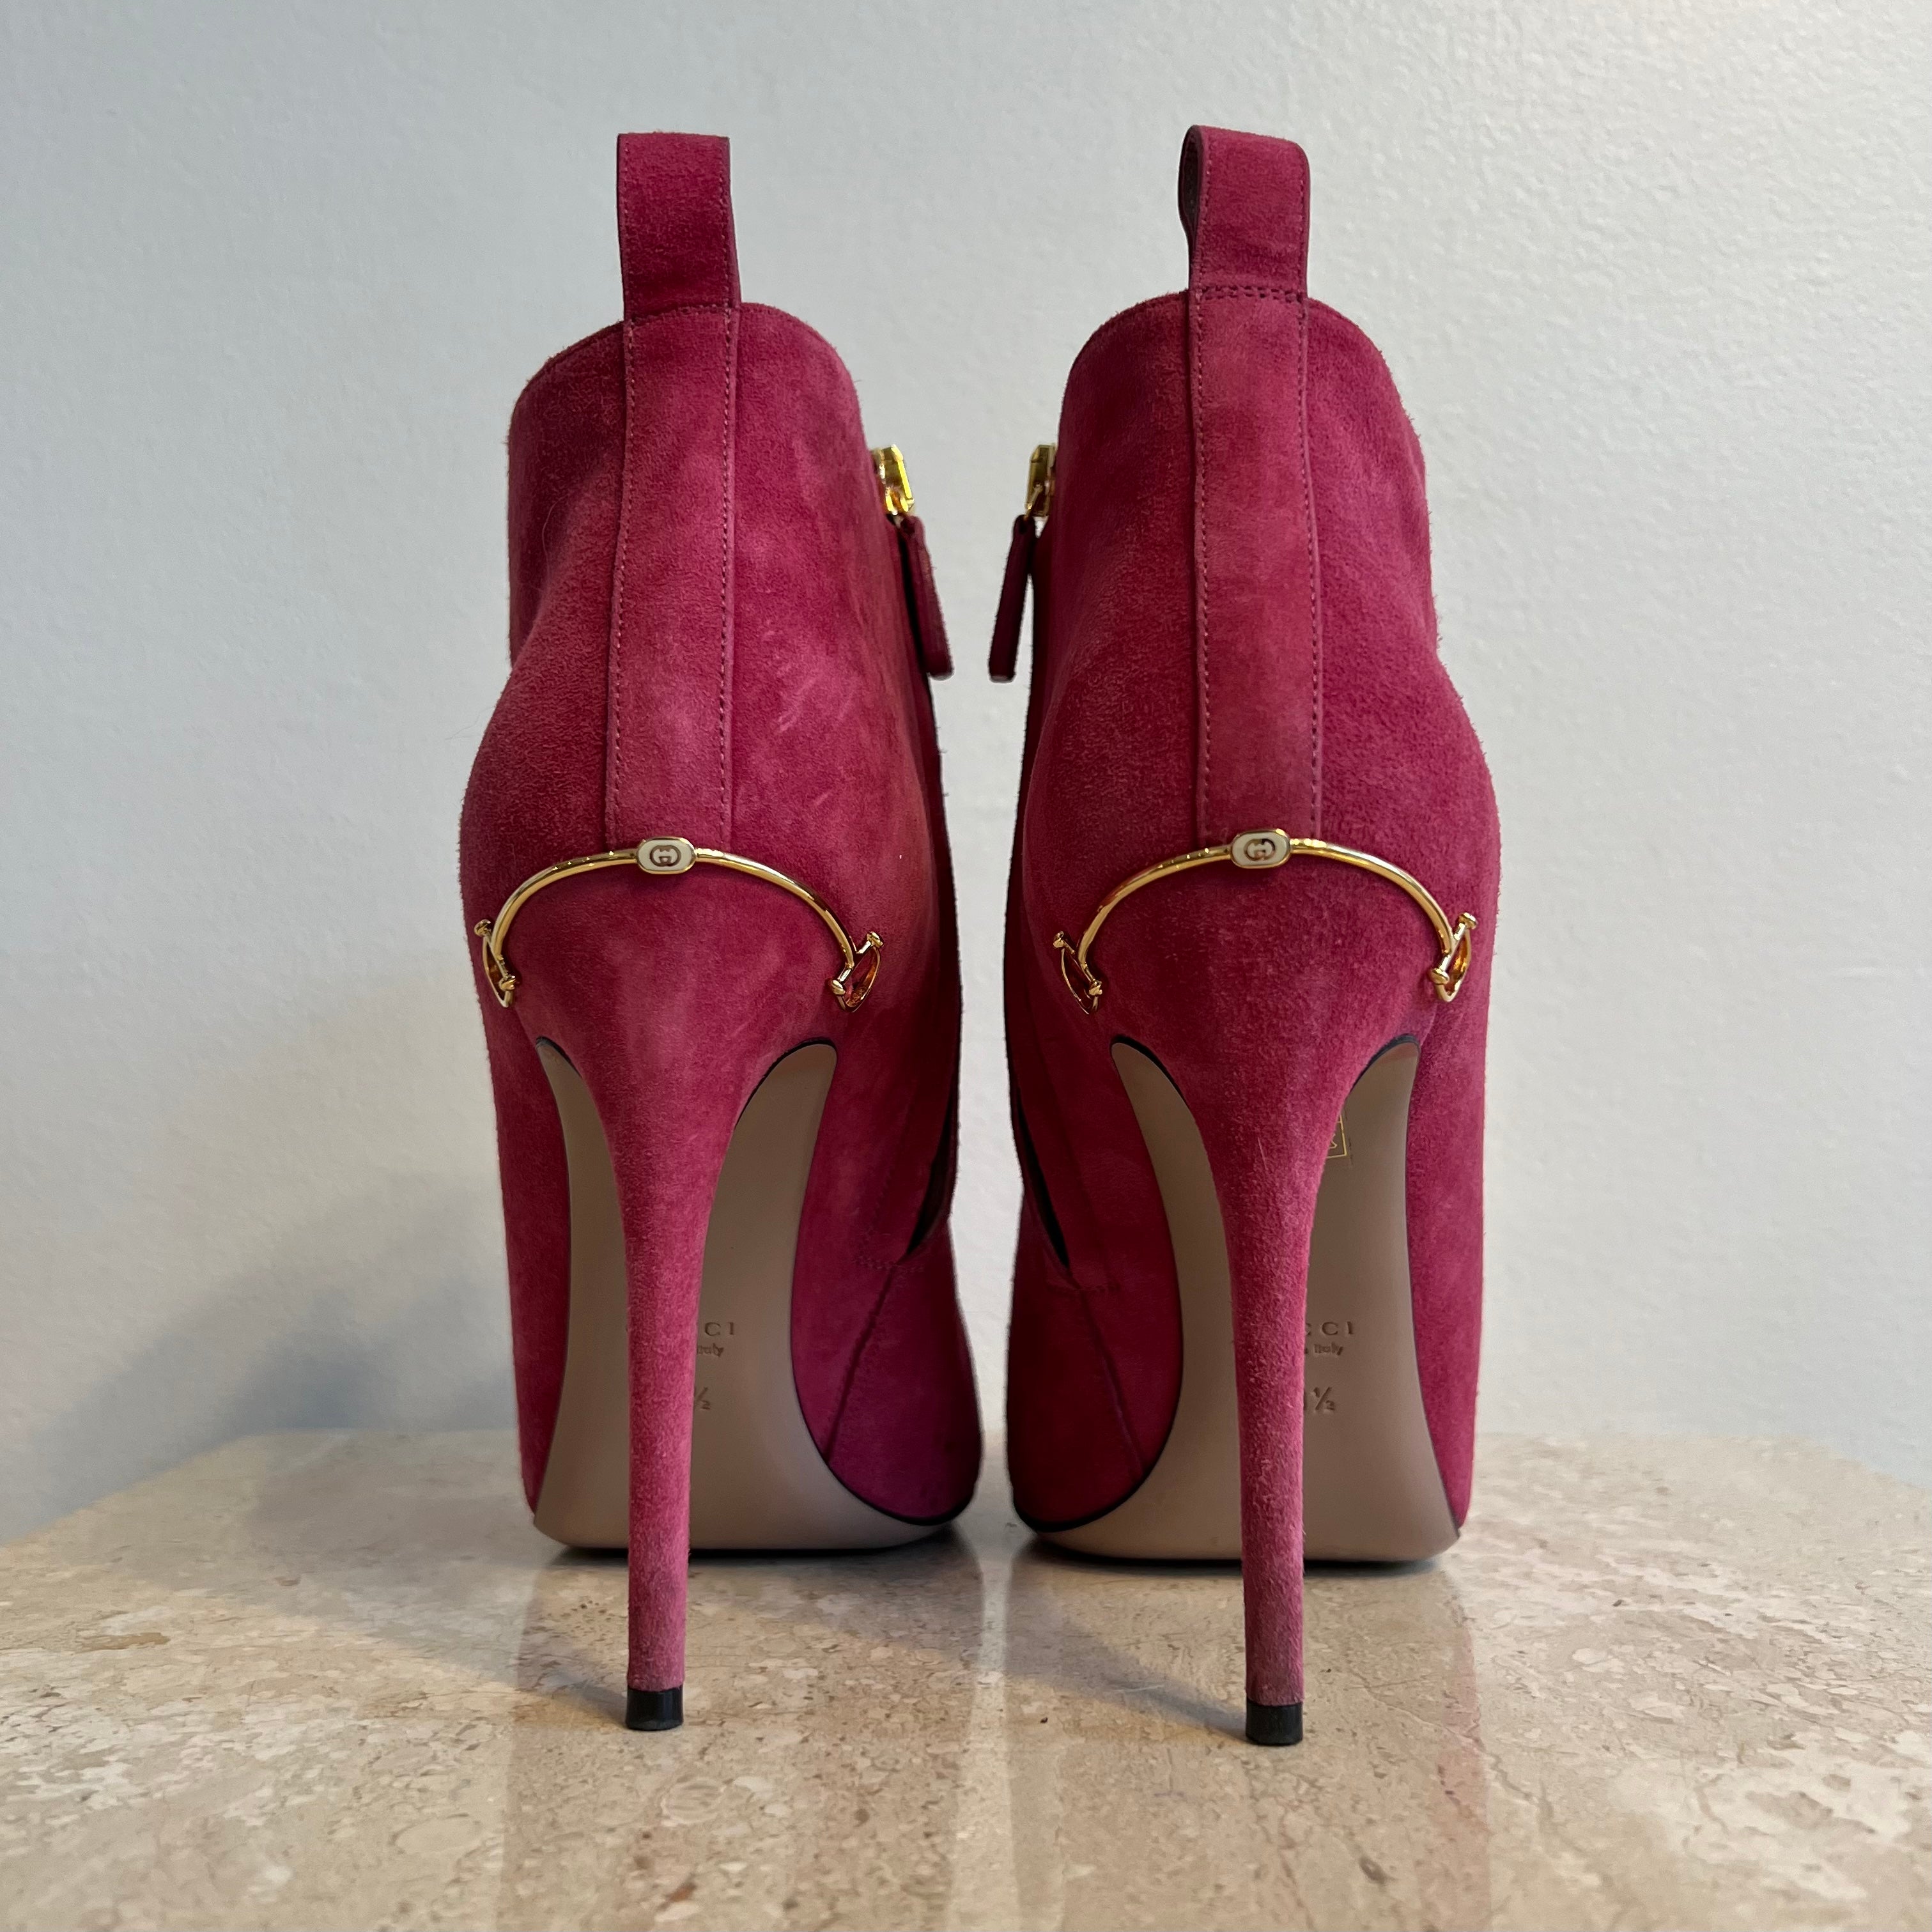 Pre-Owned GUCCI Pink Suede Bootie - Size 38.5